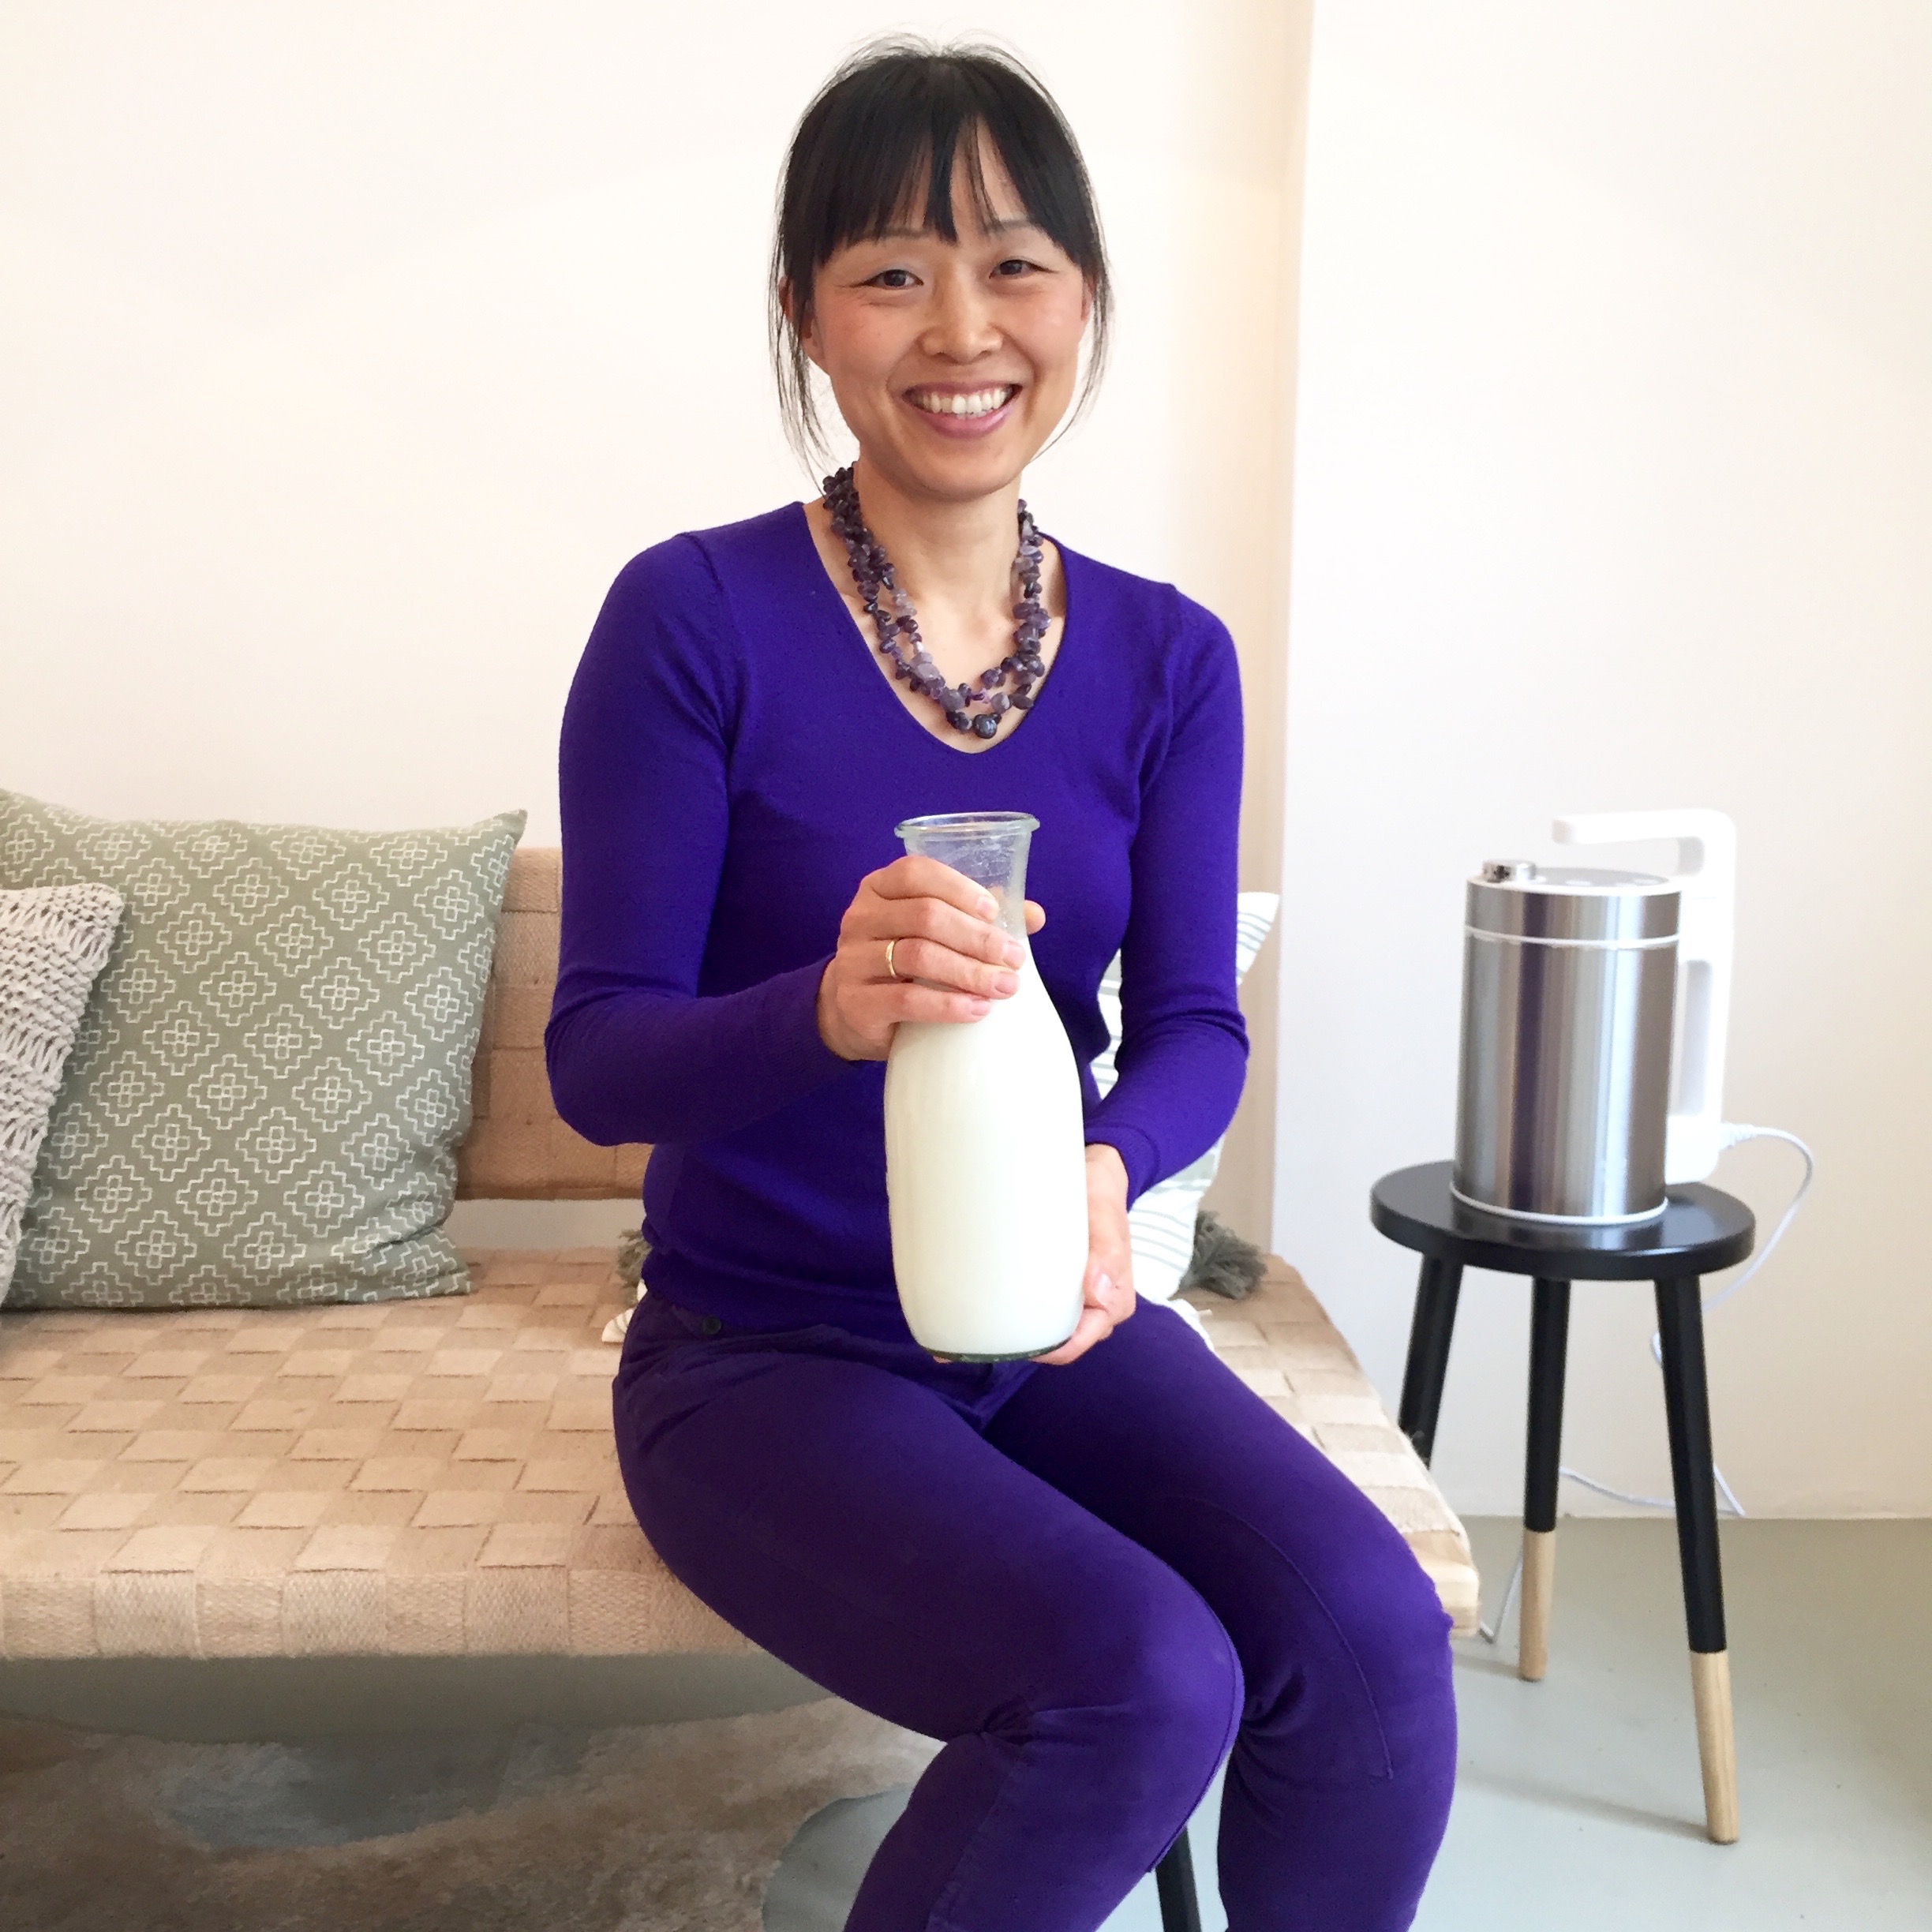 AND SOY founder Nan Zhao with her Plant Milk Maker